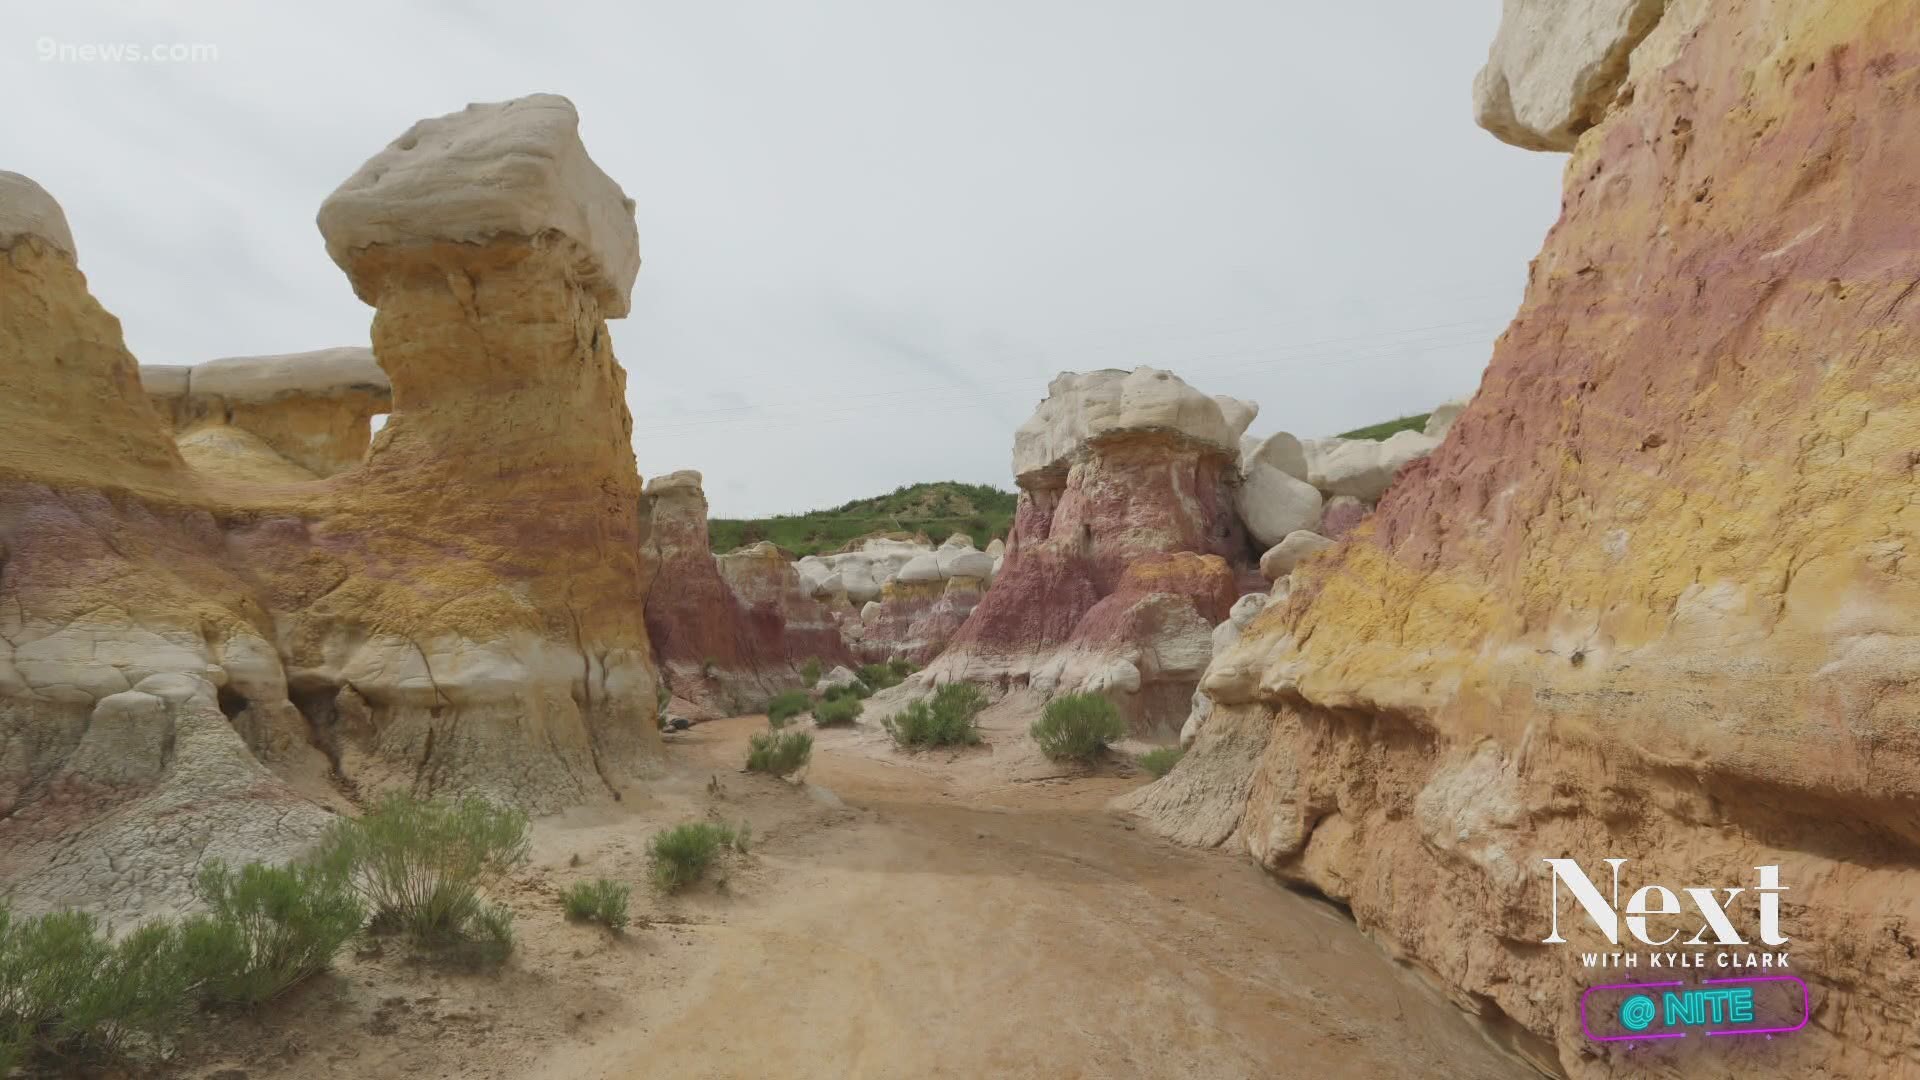 Marc Sallinger is a Colorado native rediscovering the state, as many people are after COVID. He and photojournalist Anne Herbst first did the Paint Mines in El Paso.